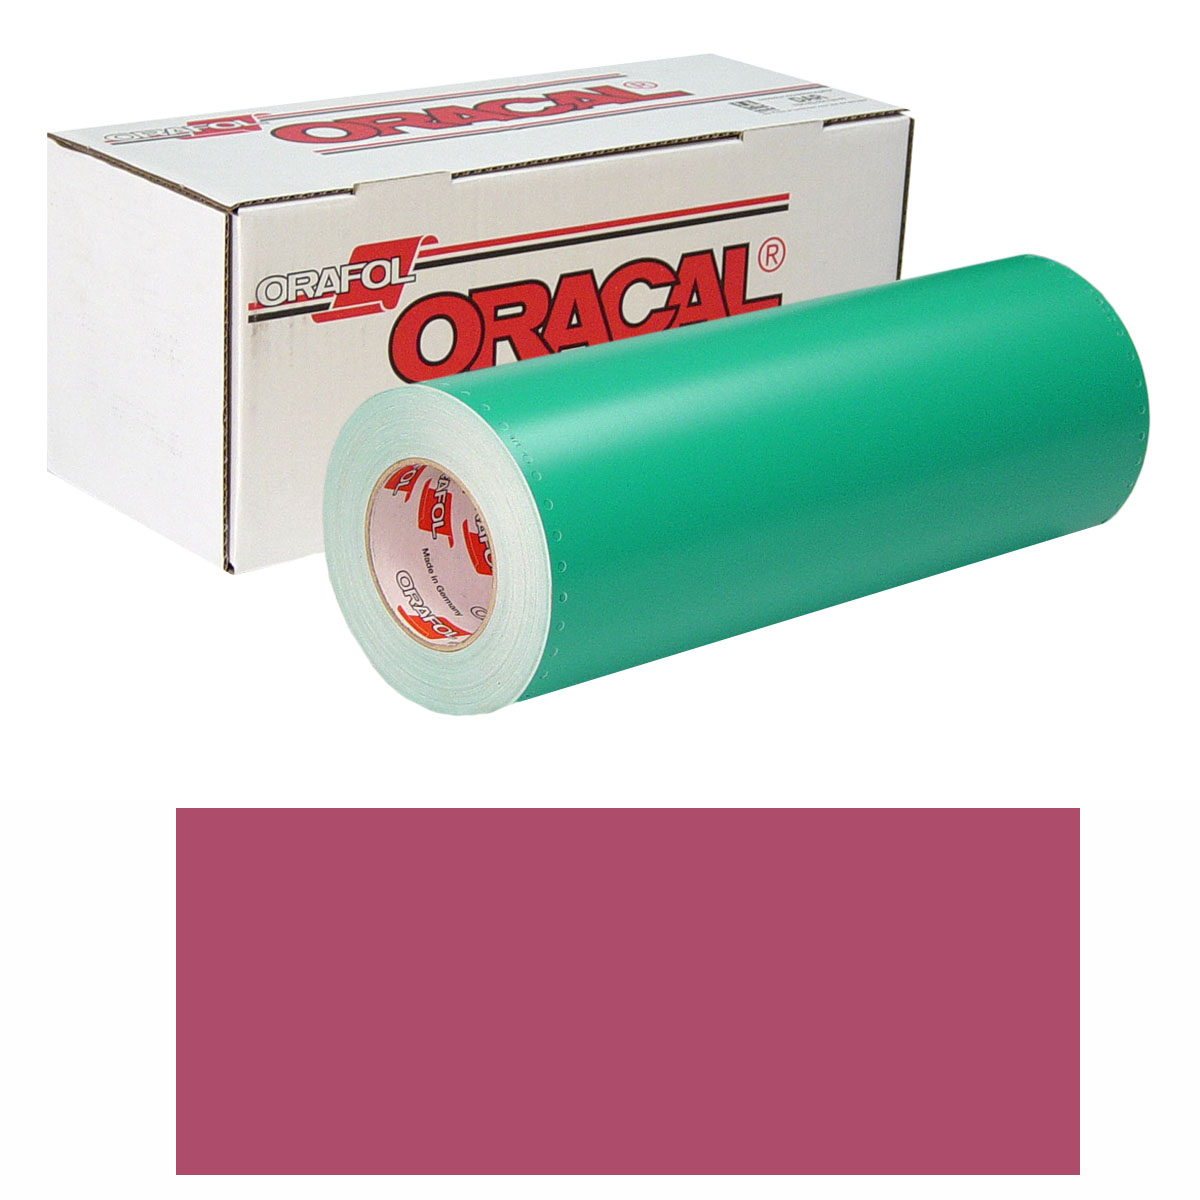 ORACAL 8500 30in X 50yd 008 Heather Red